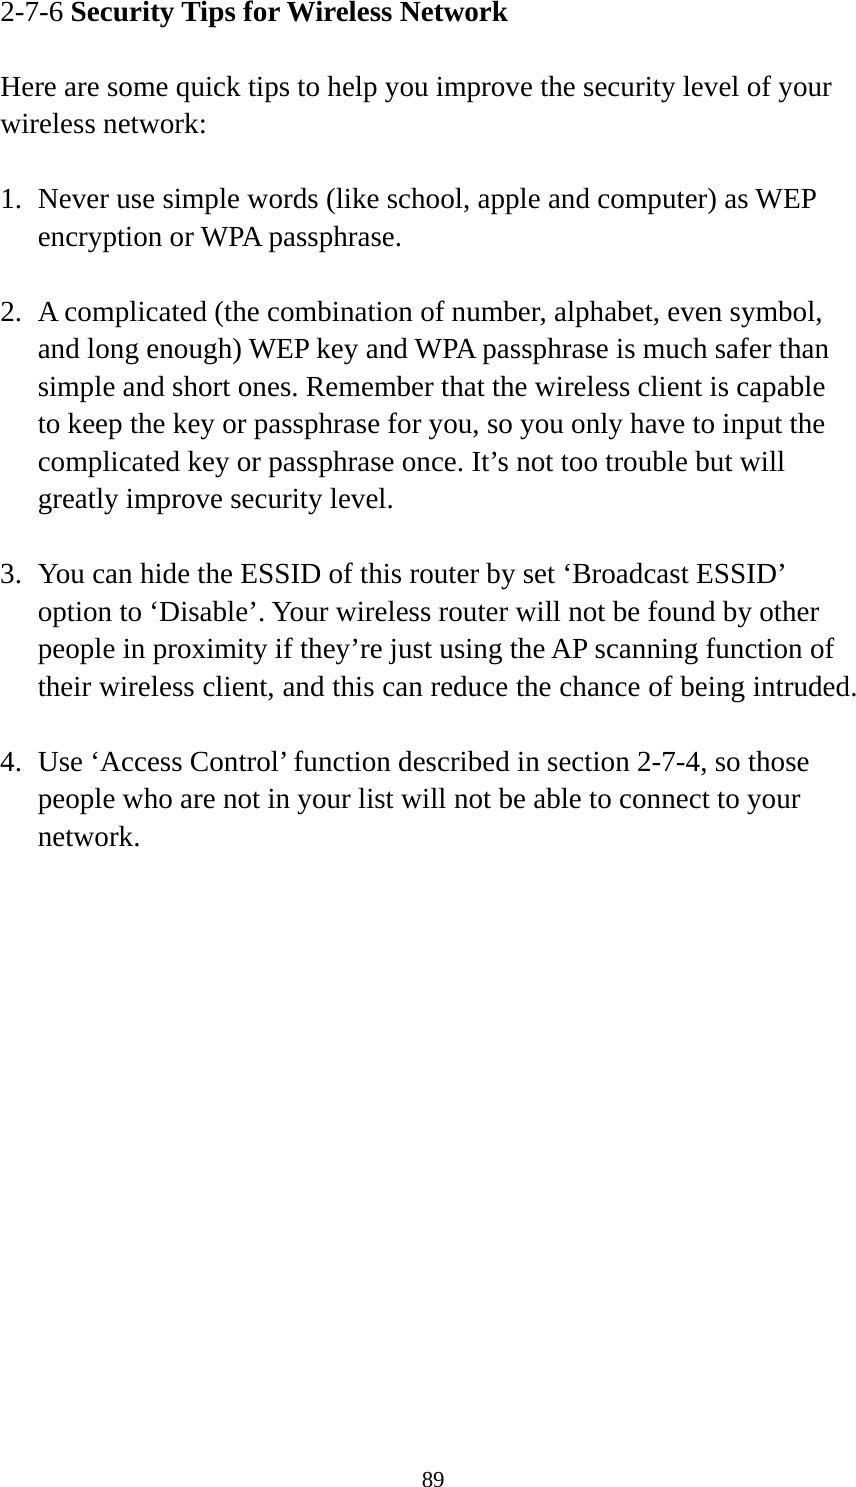 89 2-7-6 Security Tips for Wireless Network  Here are some quick tips to help you improve the security level of your wireless network:  1. Never use simple words (like school, apple and computer) as WEP encryption or WPA passphrase.  2. A complicated (the combination of number, alphabet, even symbol, and long enough) WEP key and WPA passphrase is much safer than simple and short ones. Remember that the wireless client is capable to keep the key or passphrase for you, so you only have to input the complicated key or passphrase once. It’s not too trouble but will greatly improve security level.  3. You can hide the ESSID of this router by set ‘Broadcast ESSID’ option to ‘Disable’. Your wireless router will not be found by other people in proximity if they’re just using the AP scanning function of their wireless client, and this can reduce the chance of being intruded.  4. Use ‘Access Control’ function described in section 2-7-4, so those people who are not in your list will not be able to connect to your network. 